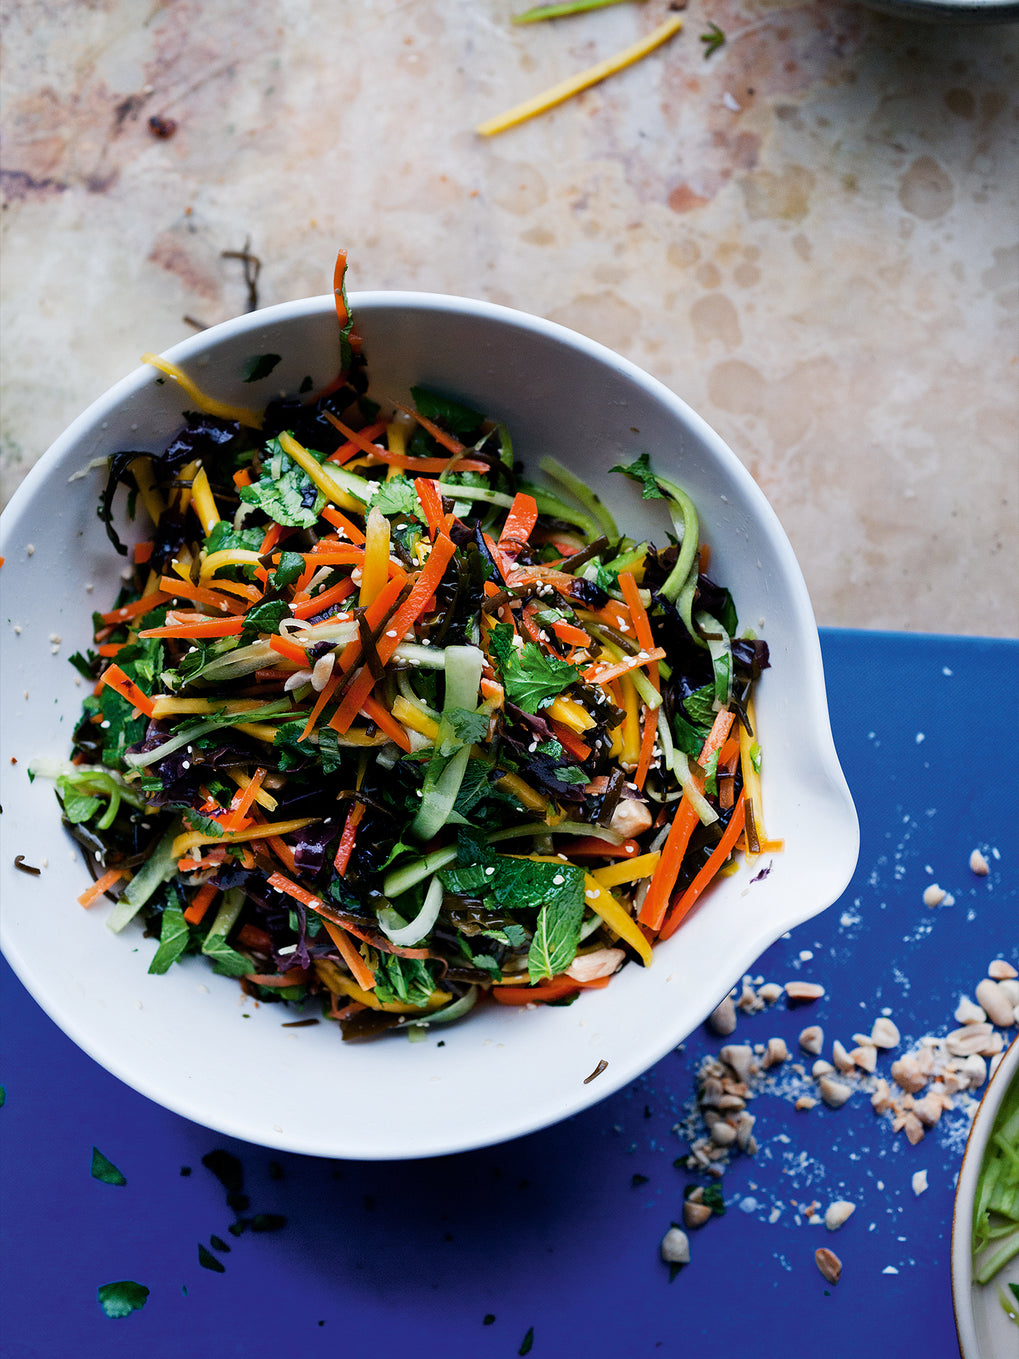 Seaweed, ginger and carrot salad